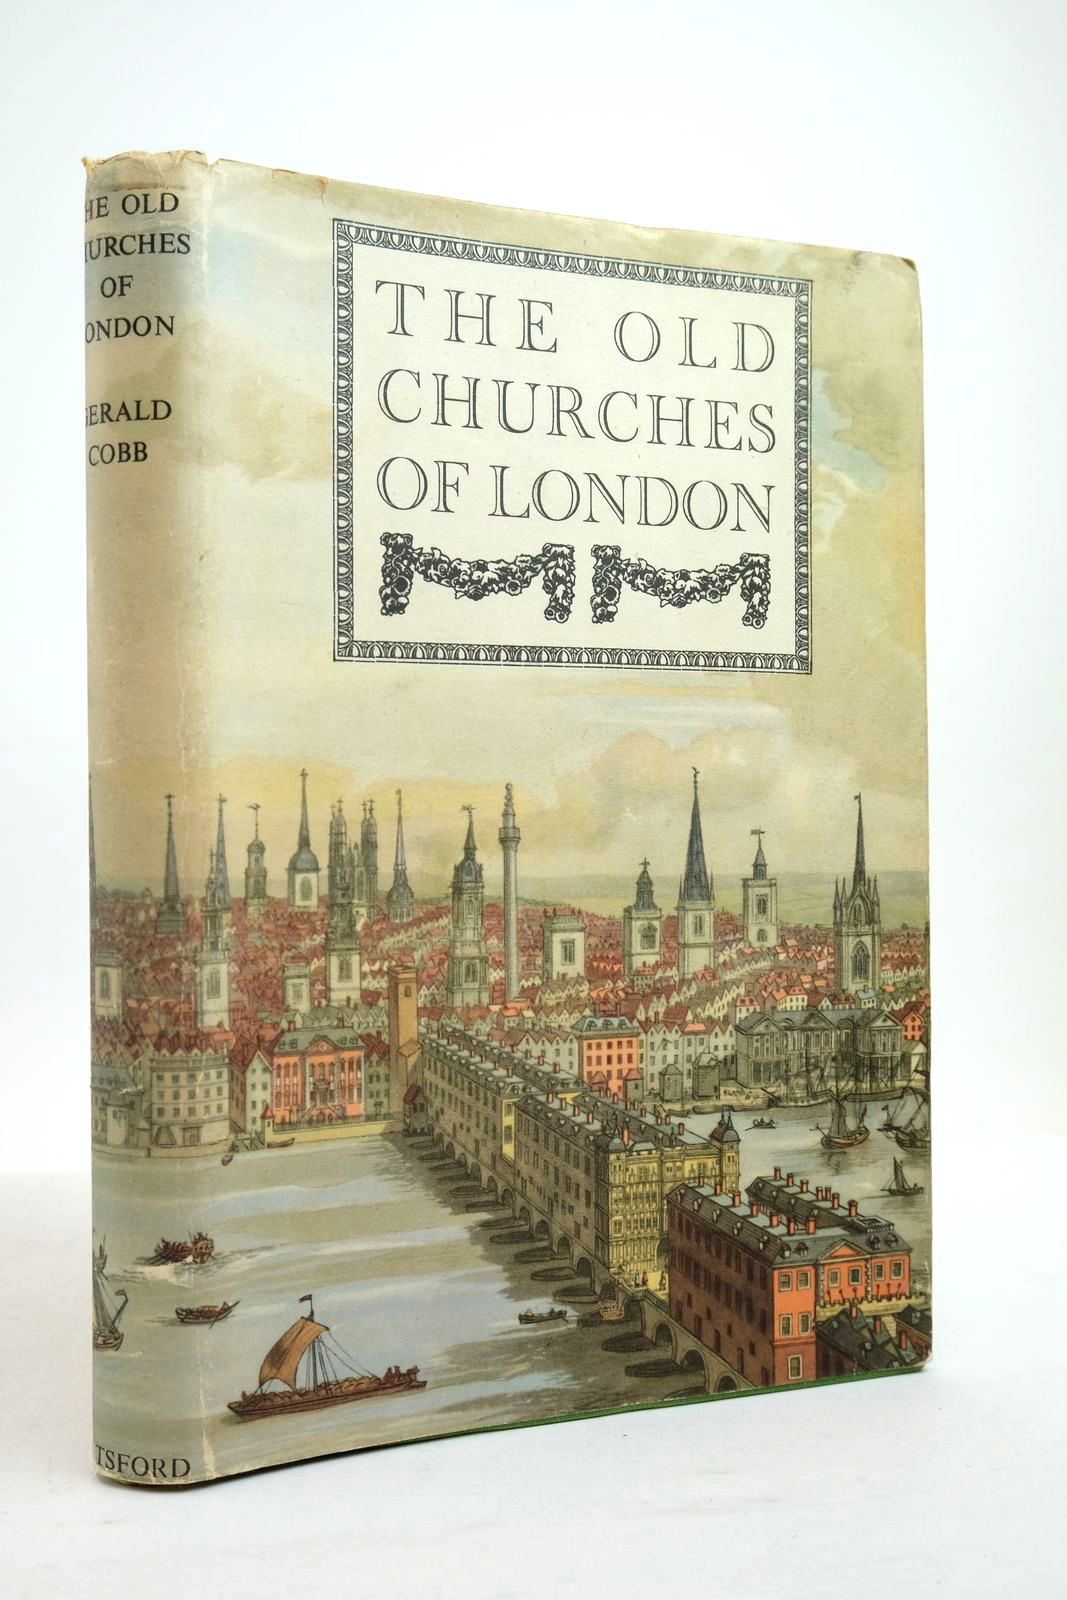 Photo of THE OLD CHURCHES OF LONDON written by Cobb, Gerald published by B.T. Batsford (STOCK CODE: 2134763)  for sale by Stella & Rose's Books